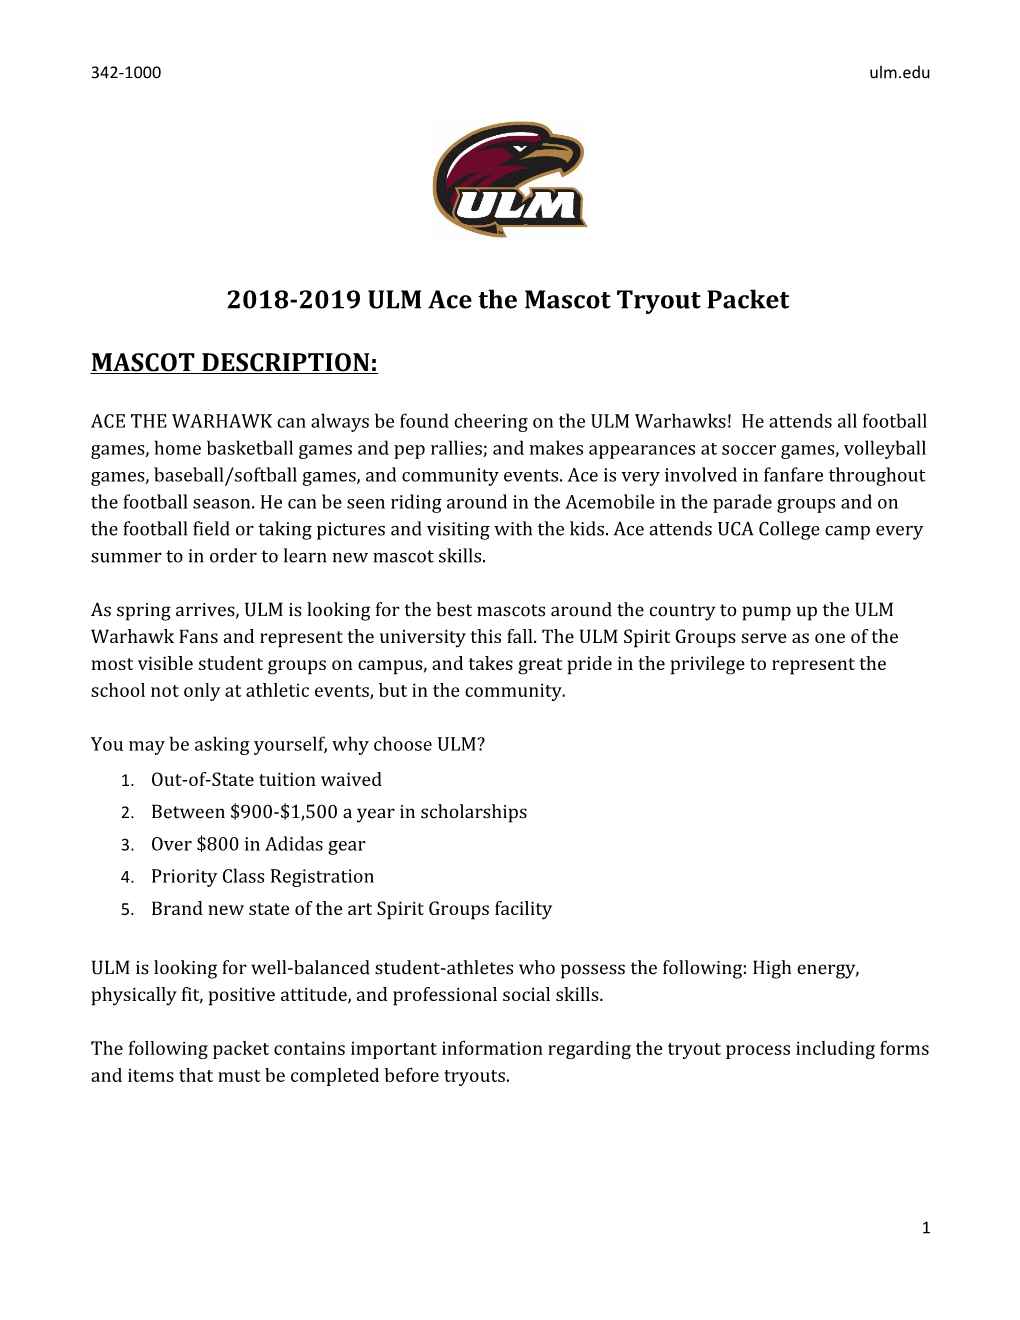 2018-2019 ULM Ace the Mascot Tryout Packet